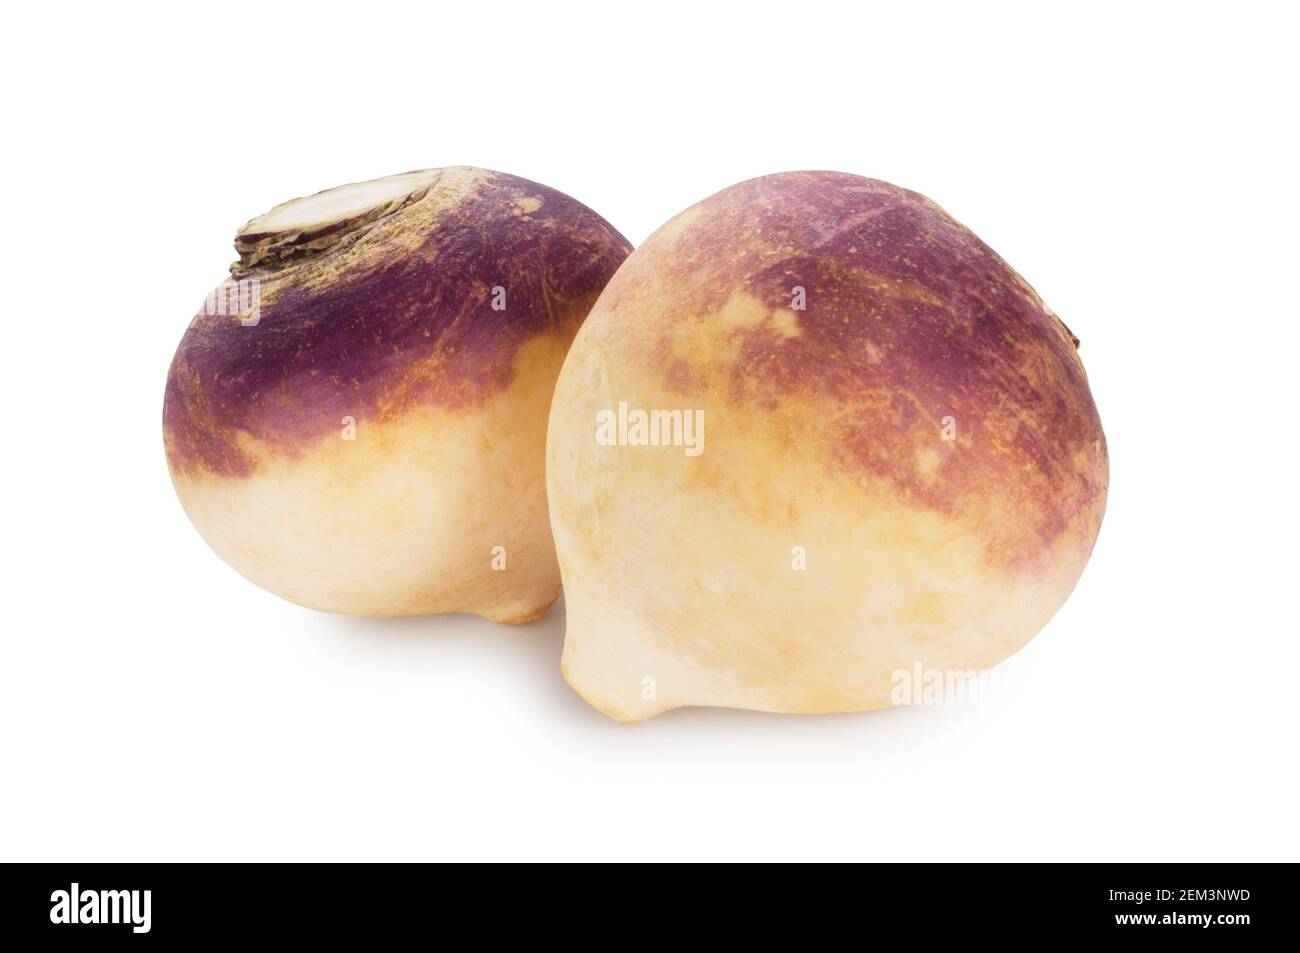 Studio shot of turnips cut out against a white background - John Gollop Stock Photo